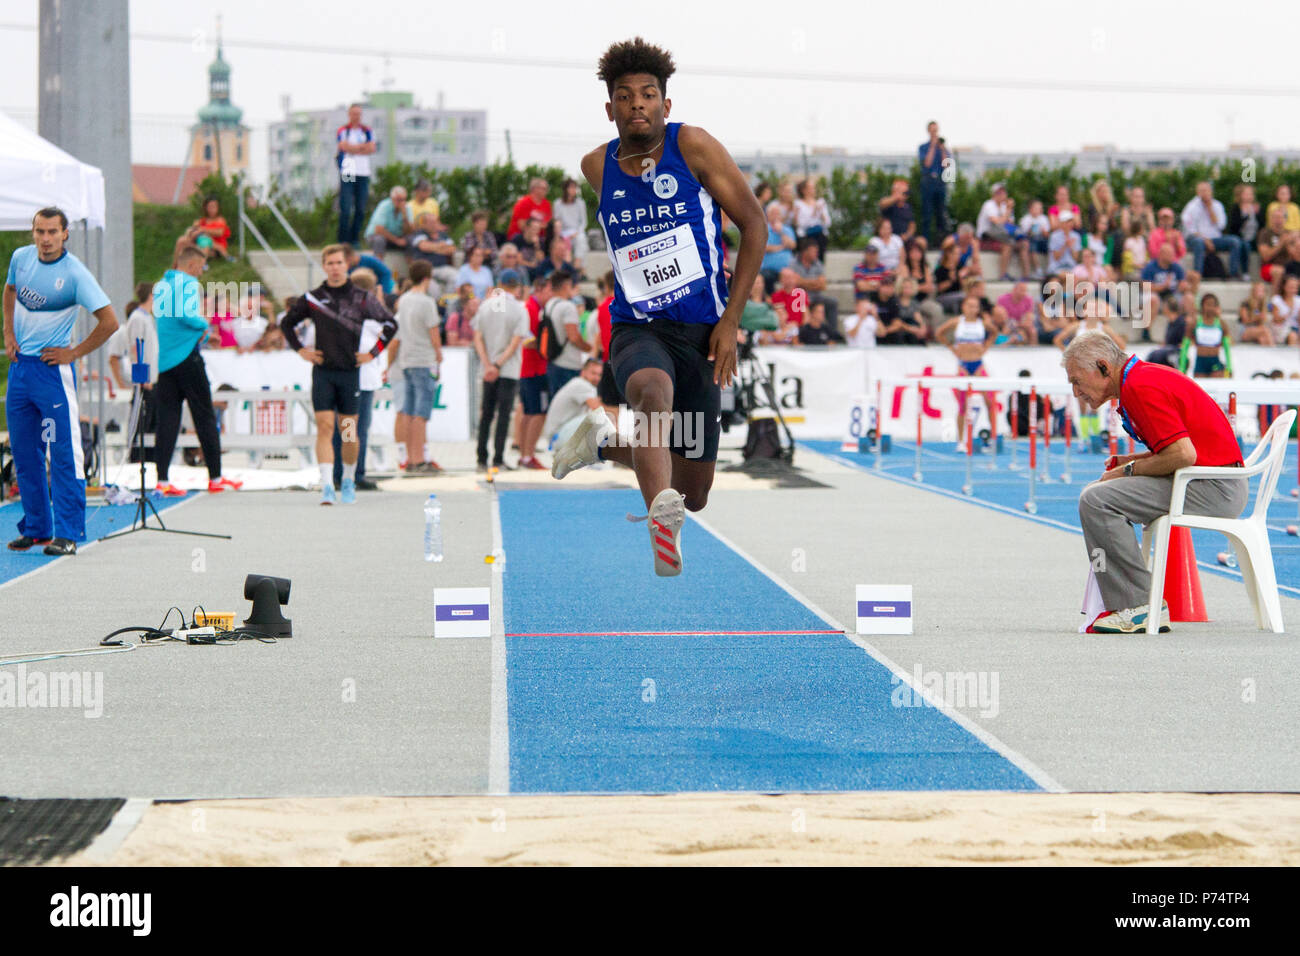 Sudanese triple jumper Ahmad Faisal competing at the P-T-S athletics meeting in the sports site of x-bionic sphere® in Samorín, Slovakia Stock Photo